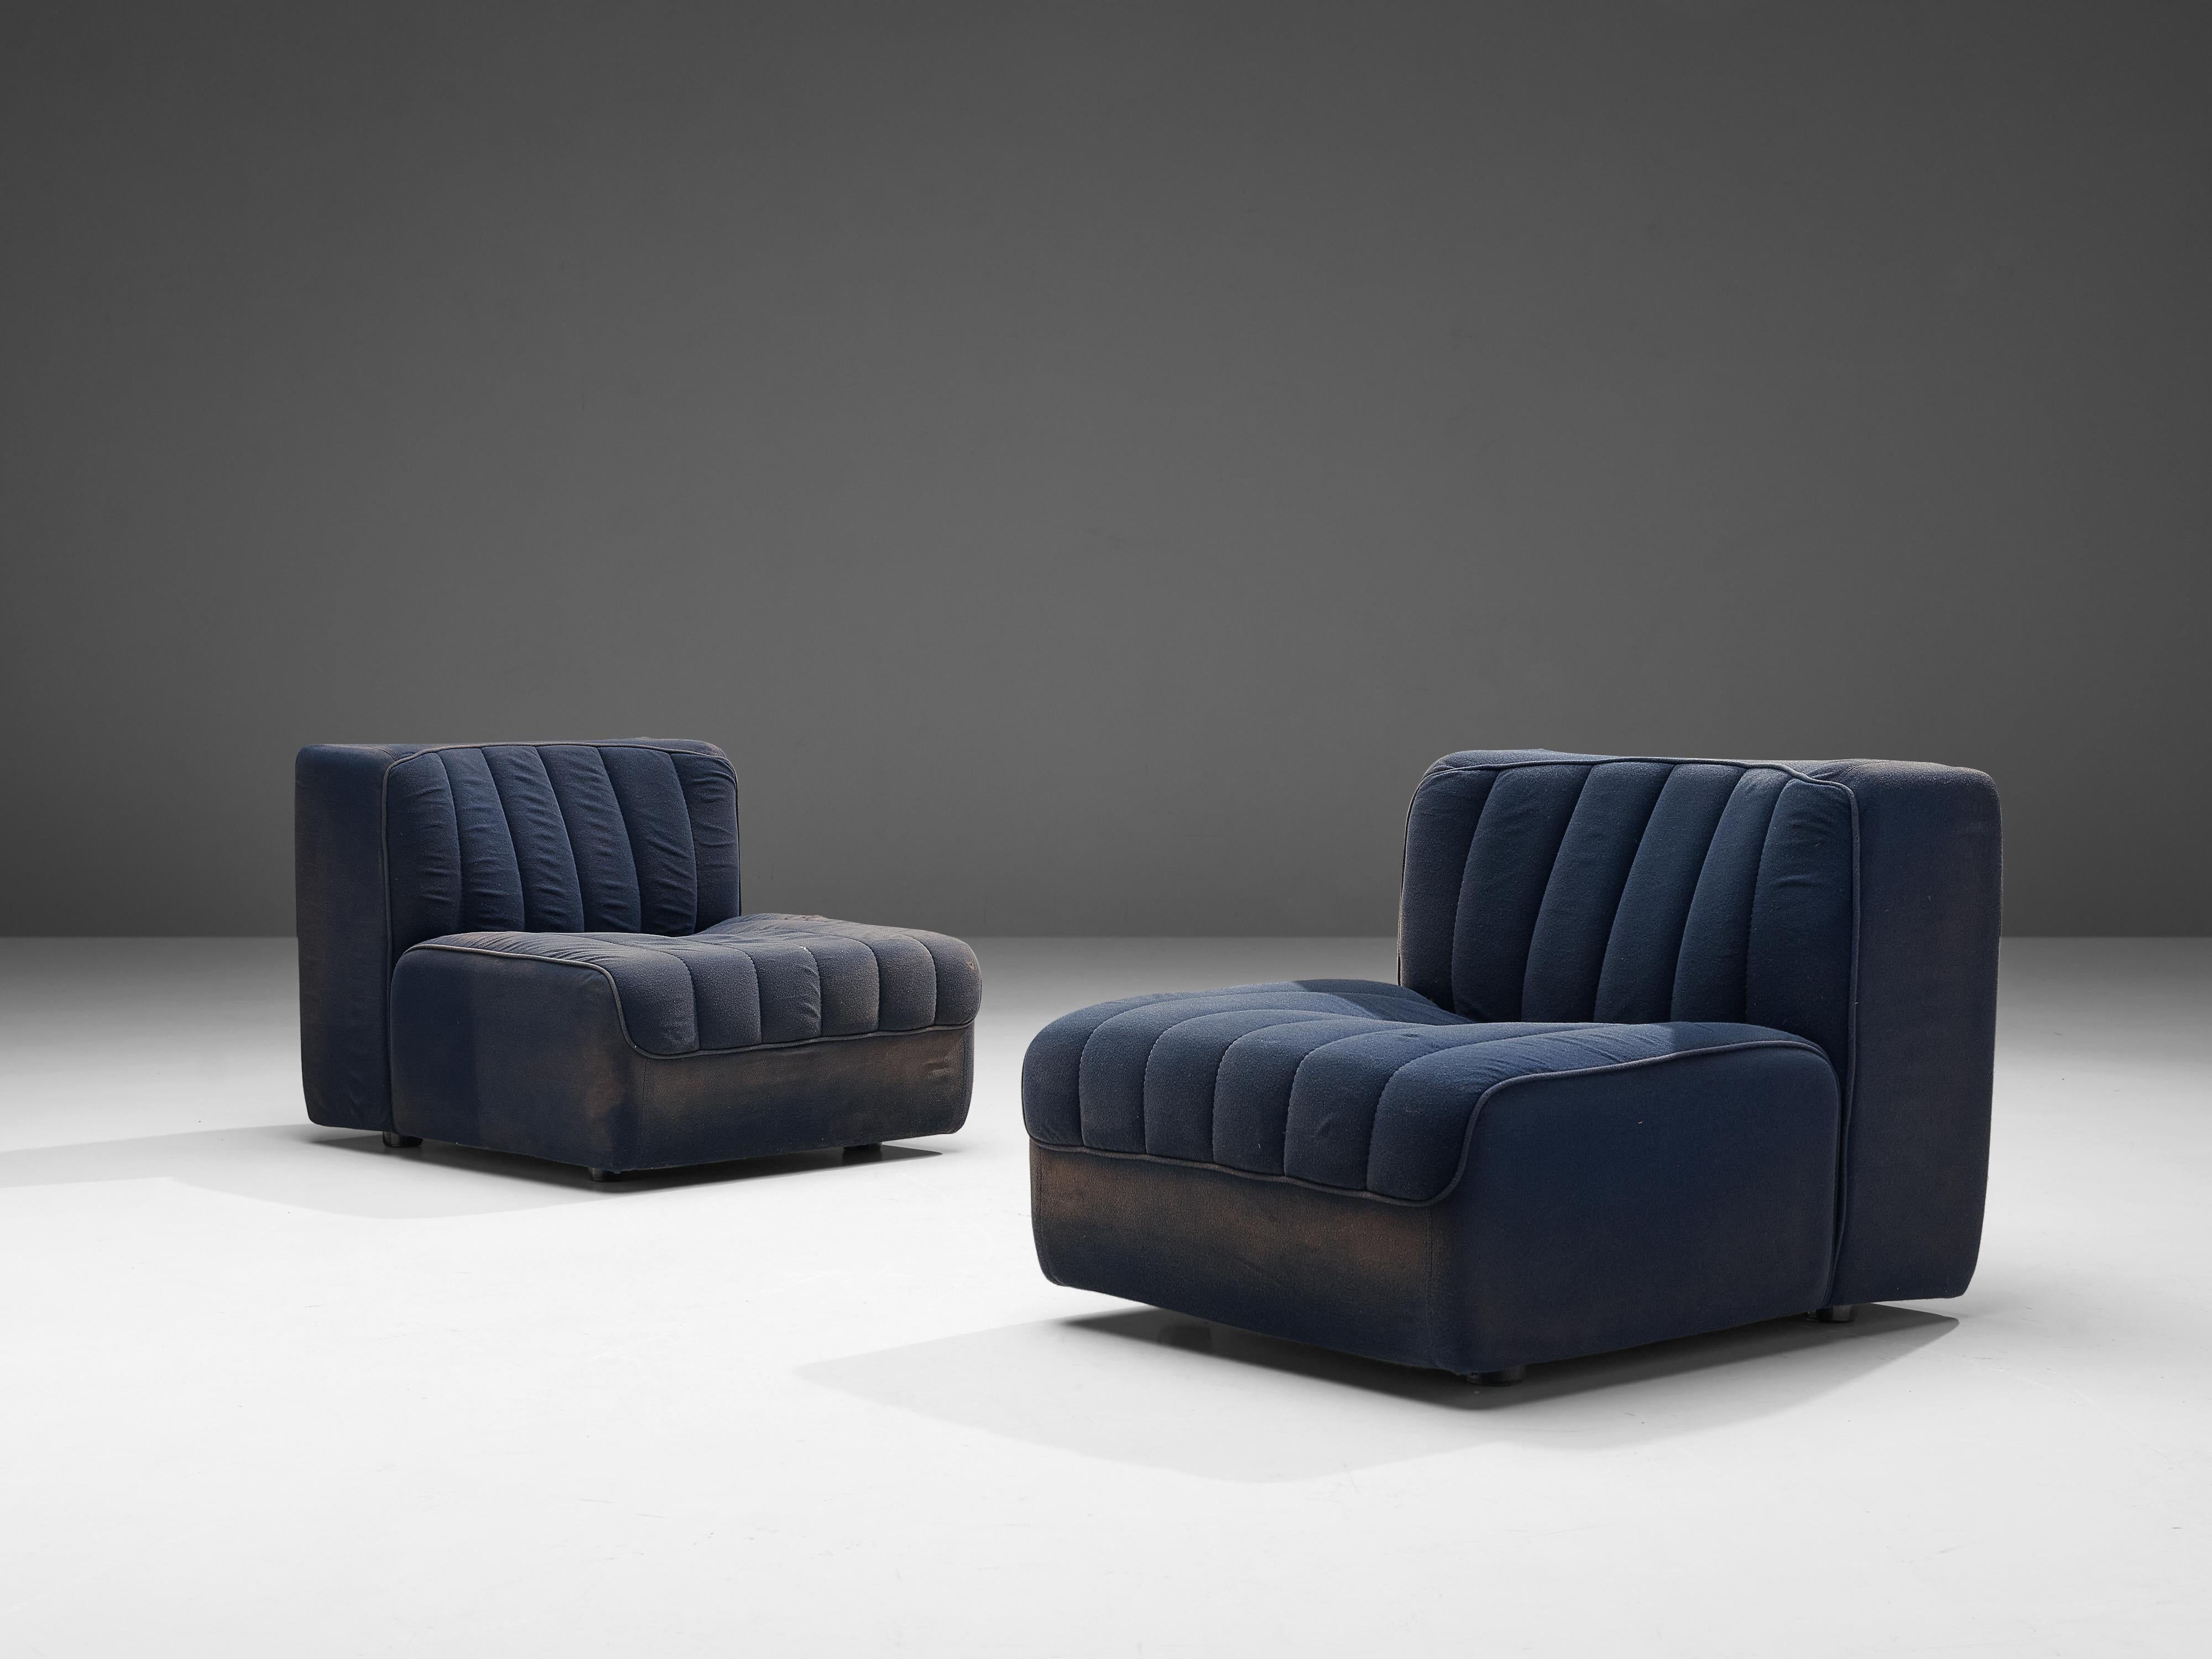 Tito Agnoli for Arflex, modular lounge chairs or sofa model '9000', blue fabric upholstery, Italy, 1970s

The sectional elements of this sofa can be used freely and apart from one another as lounge chairs. The backs and armrests are divided into